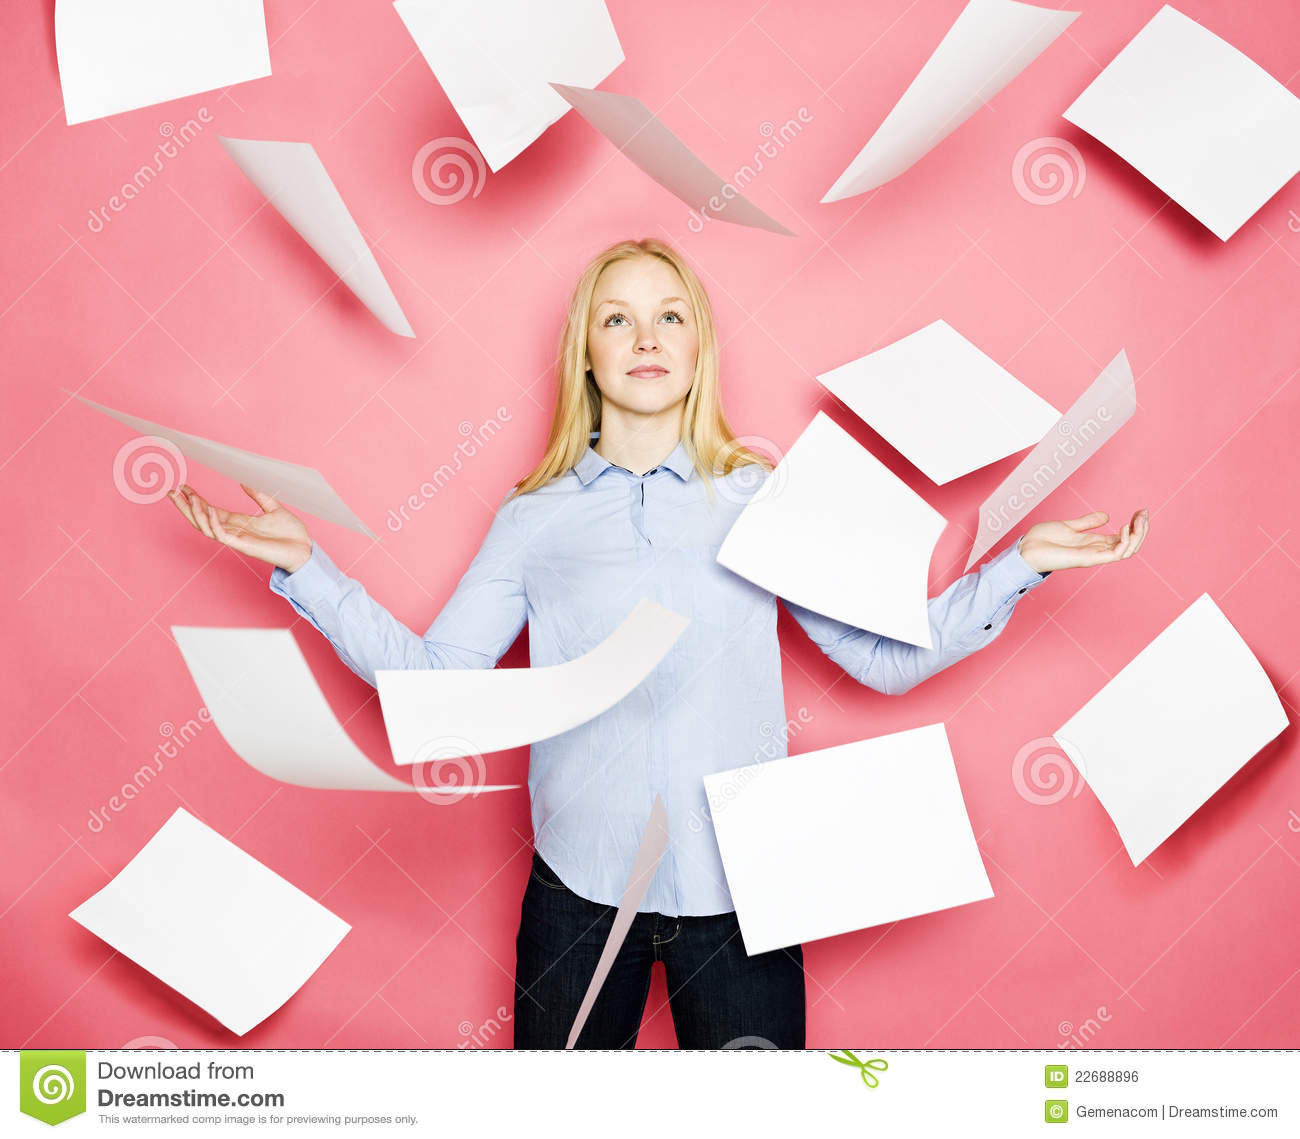 Flying Papers Royalty Free Stock Image   Image  22688896